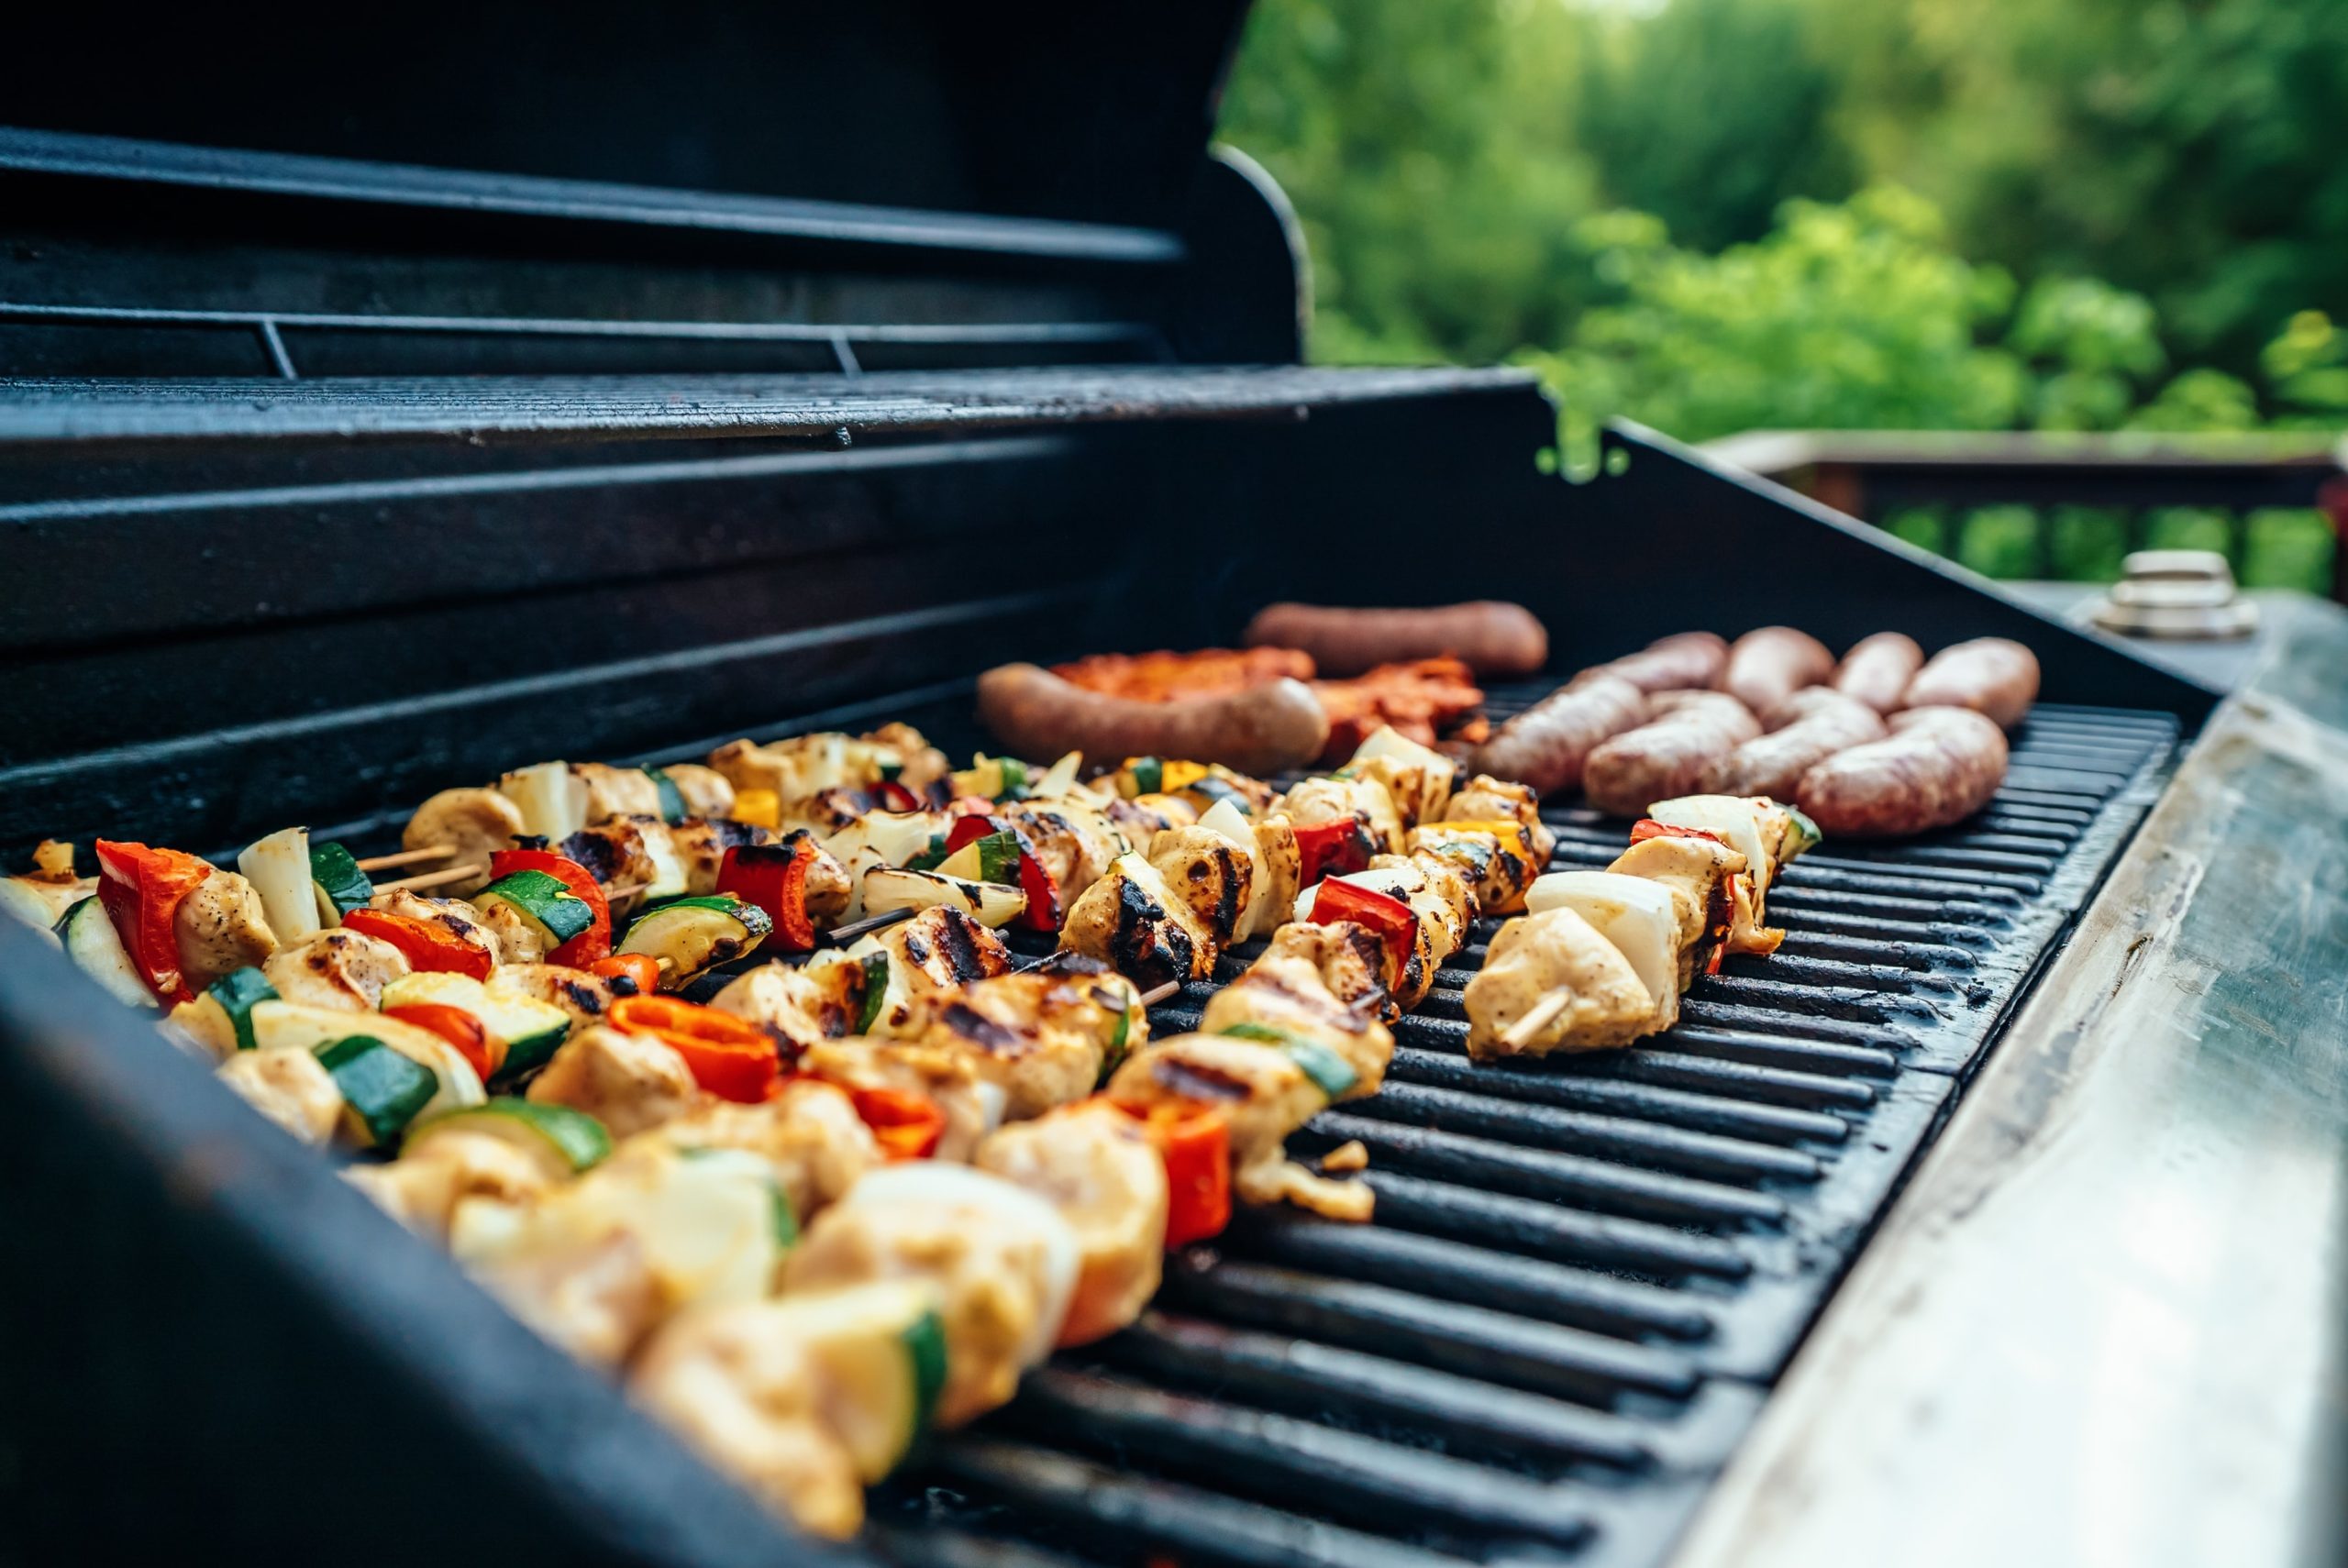 Top 4 Ways to Grill Vegetables for Your Healthy Meals